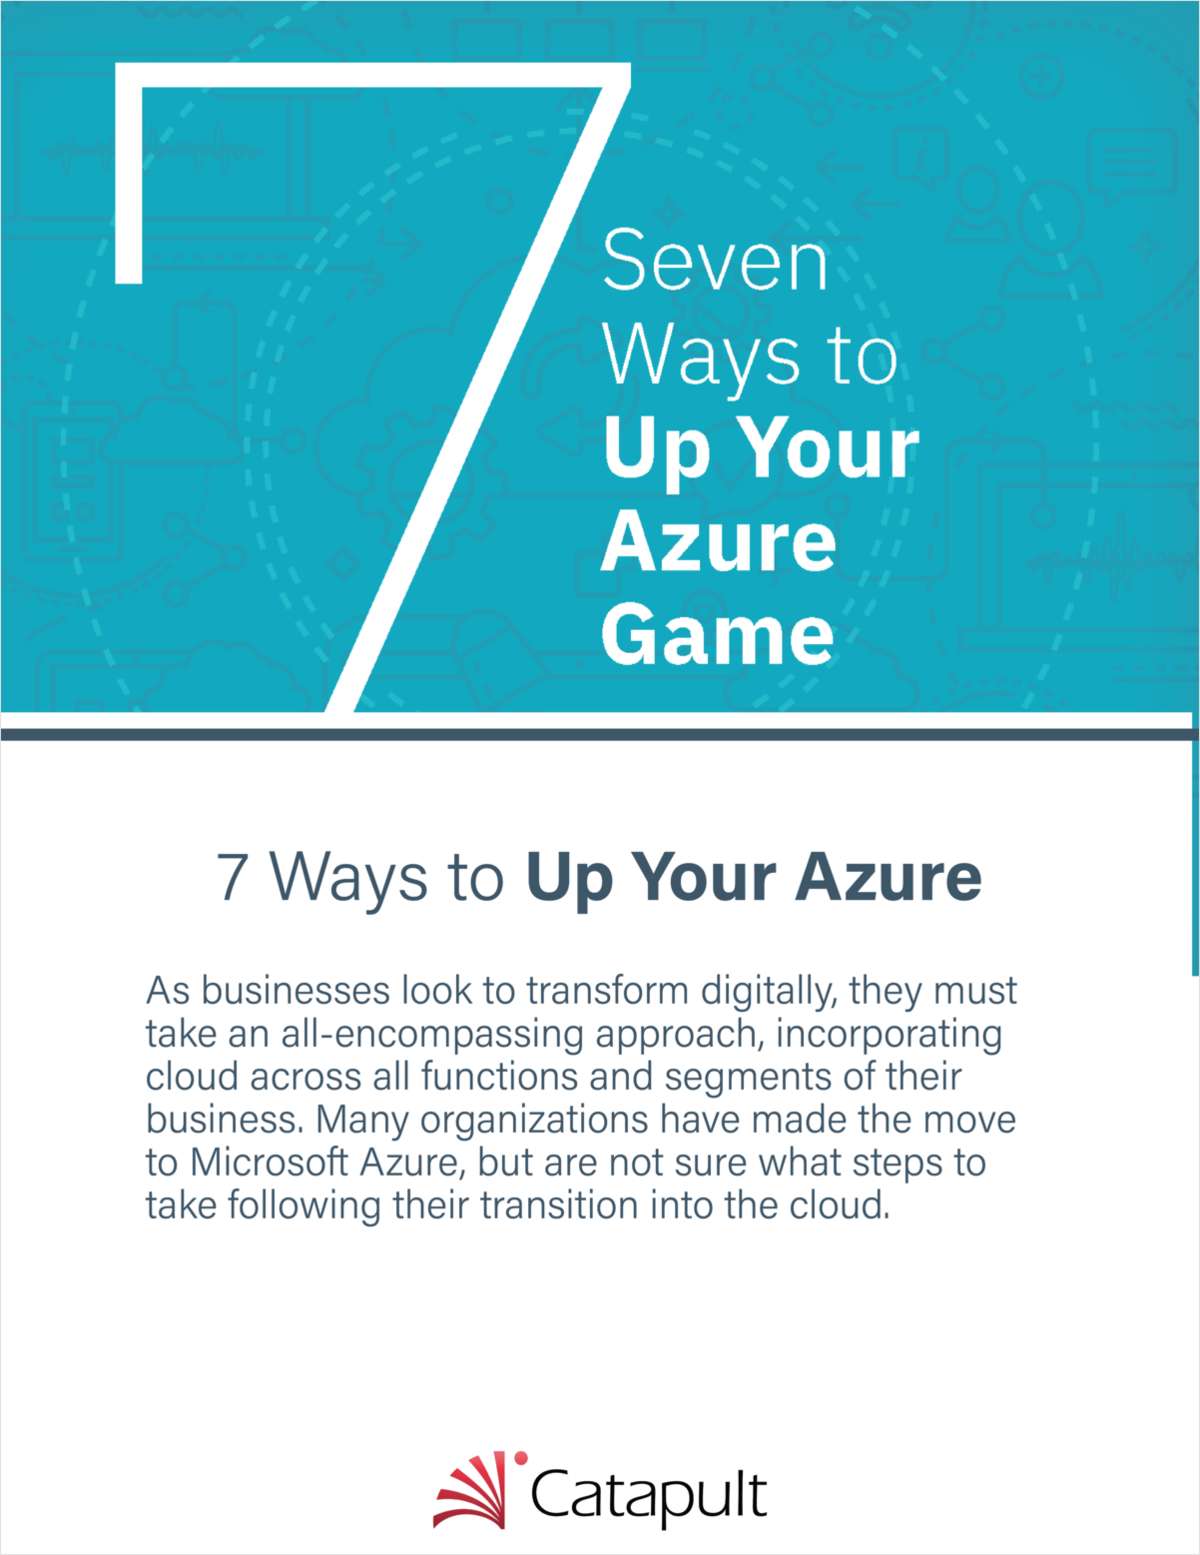 7 Ways to Up Your Azure Game